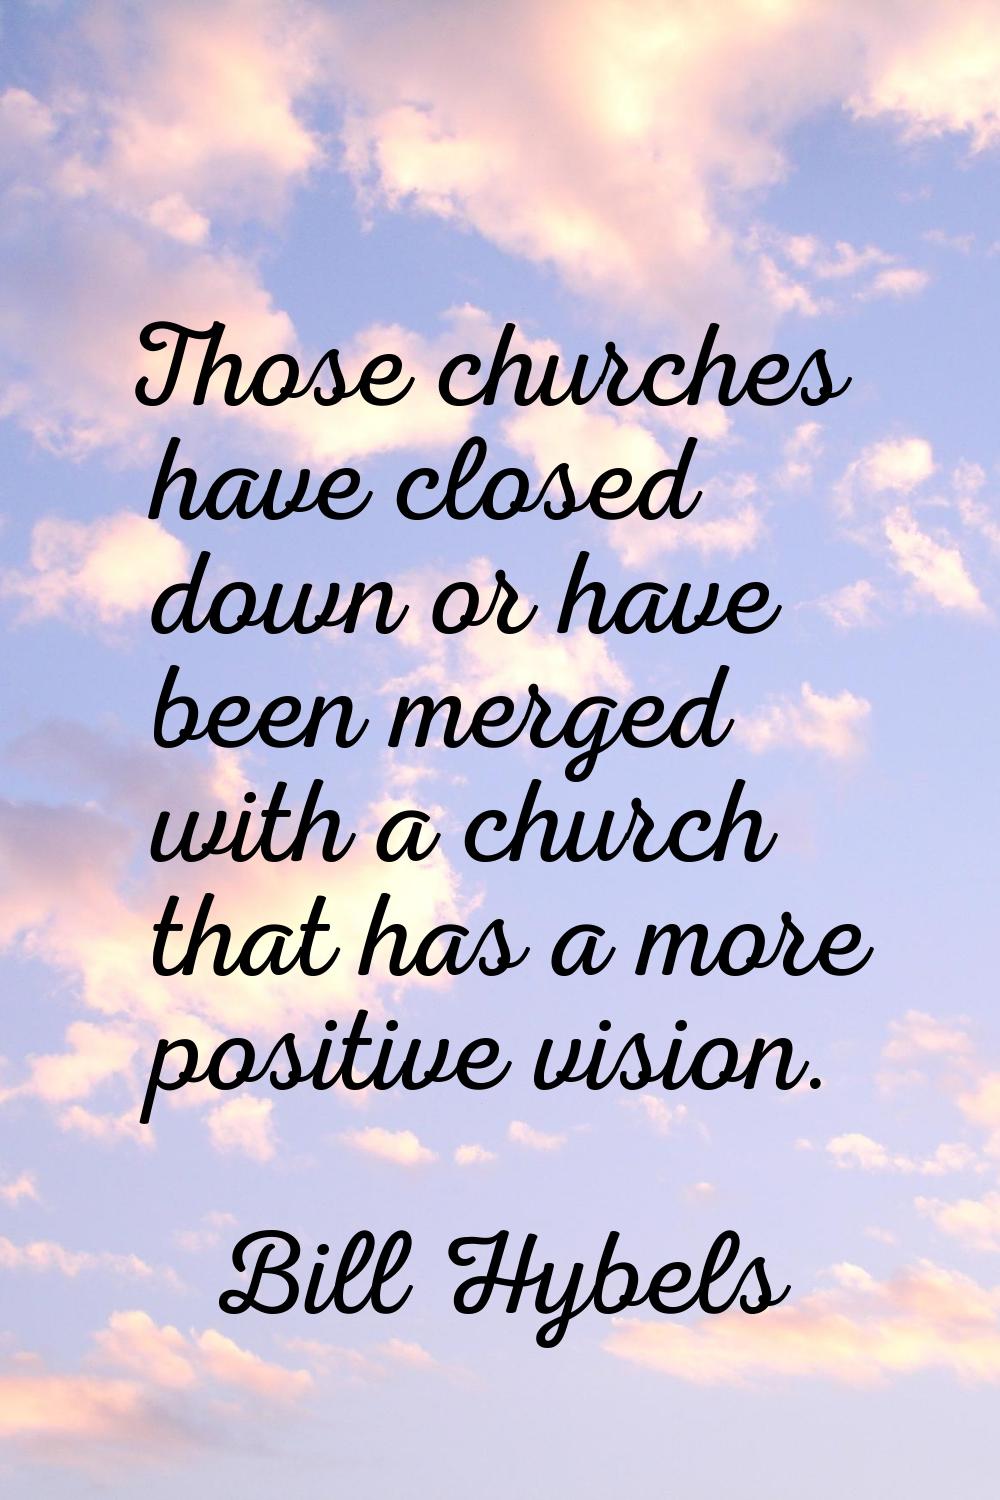 Those churches have closed down or have been merged with a church that has a more positive vision.